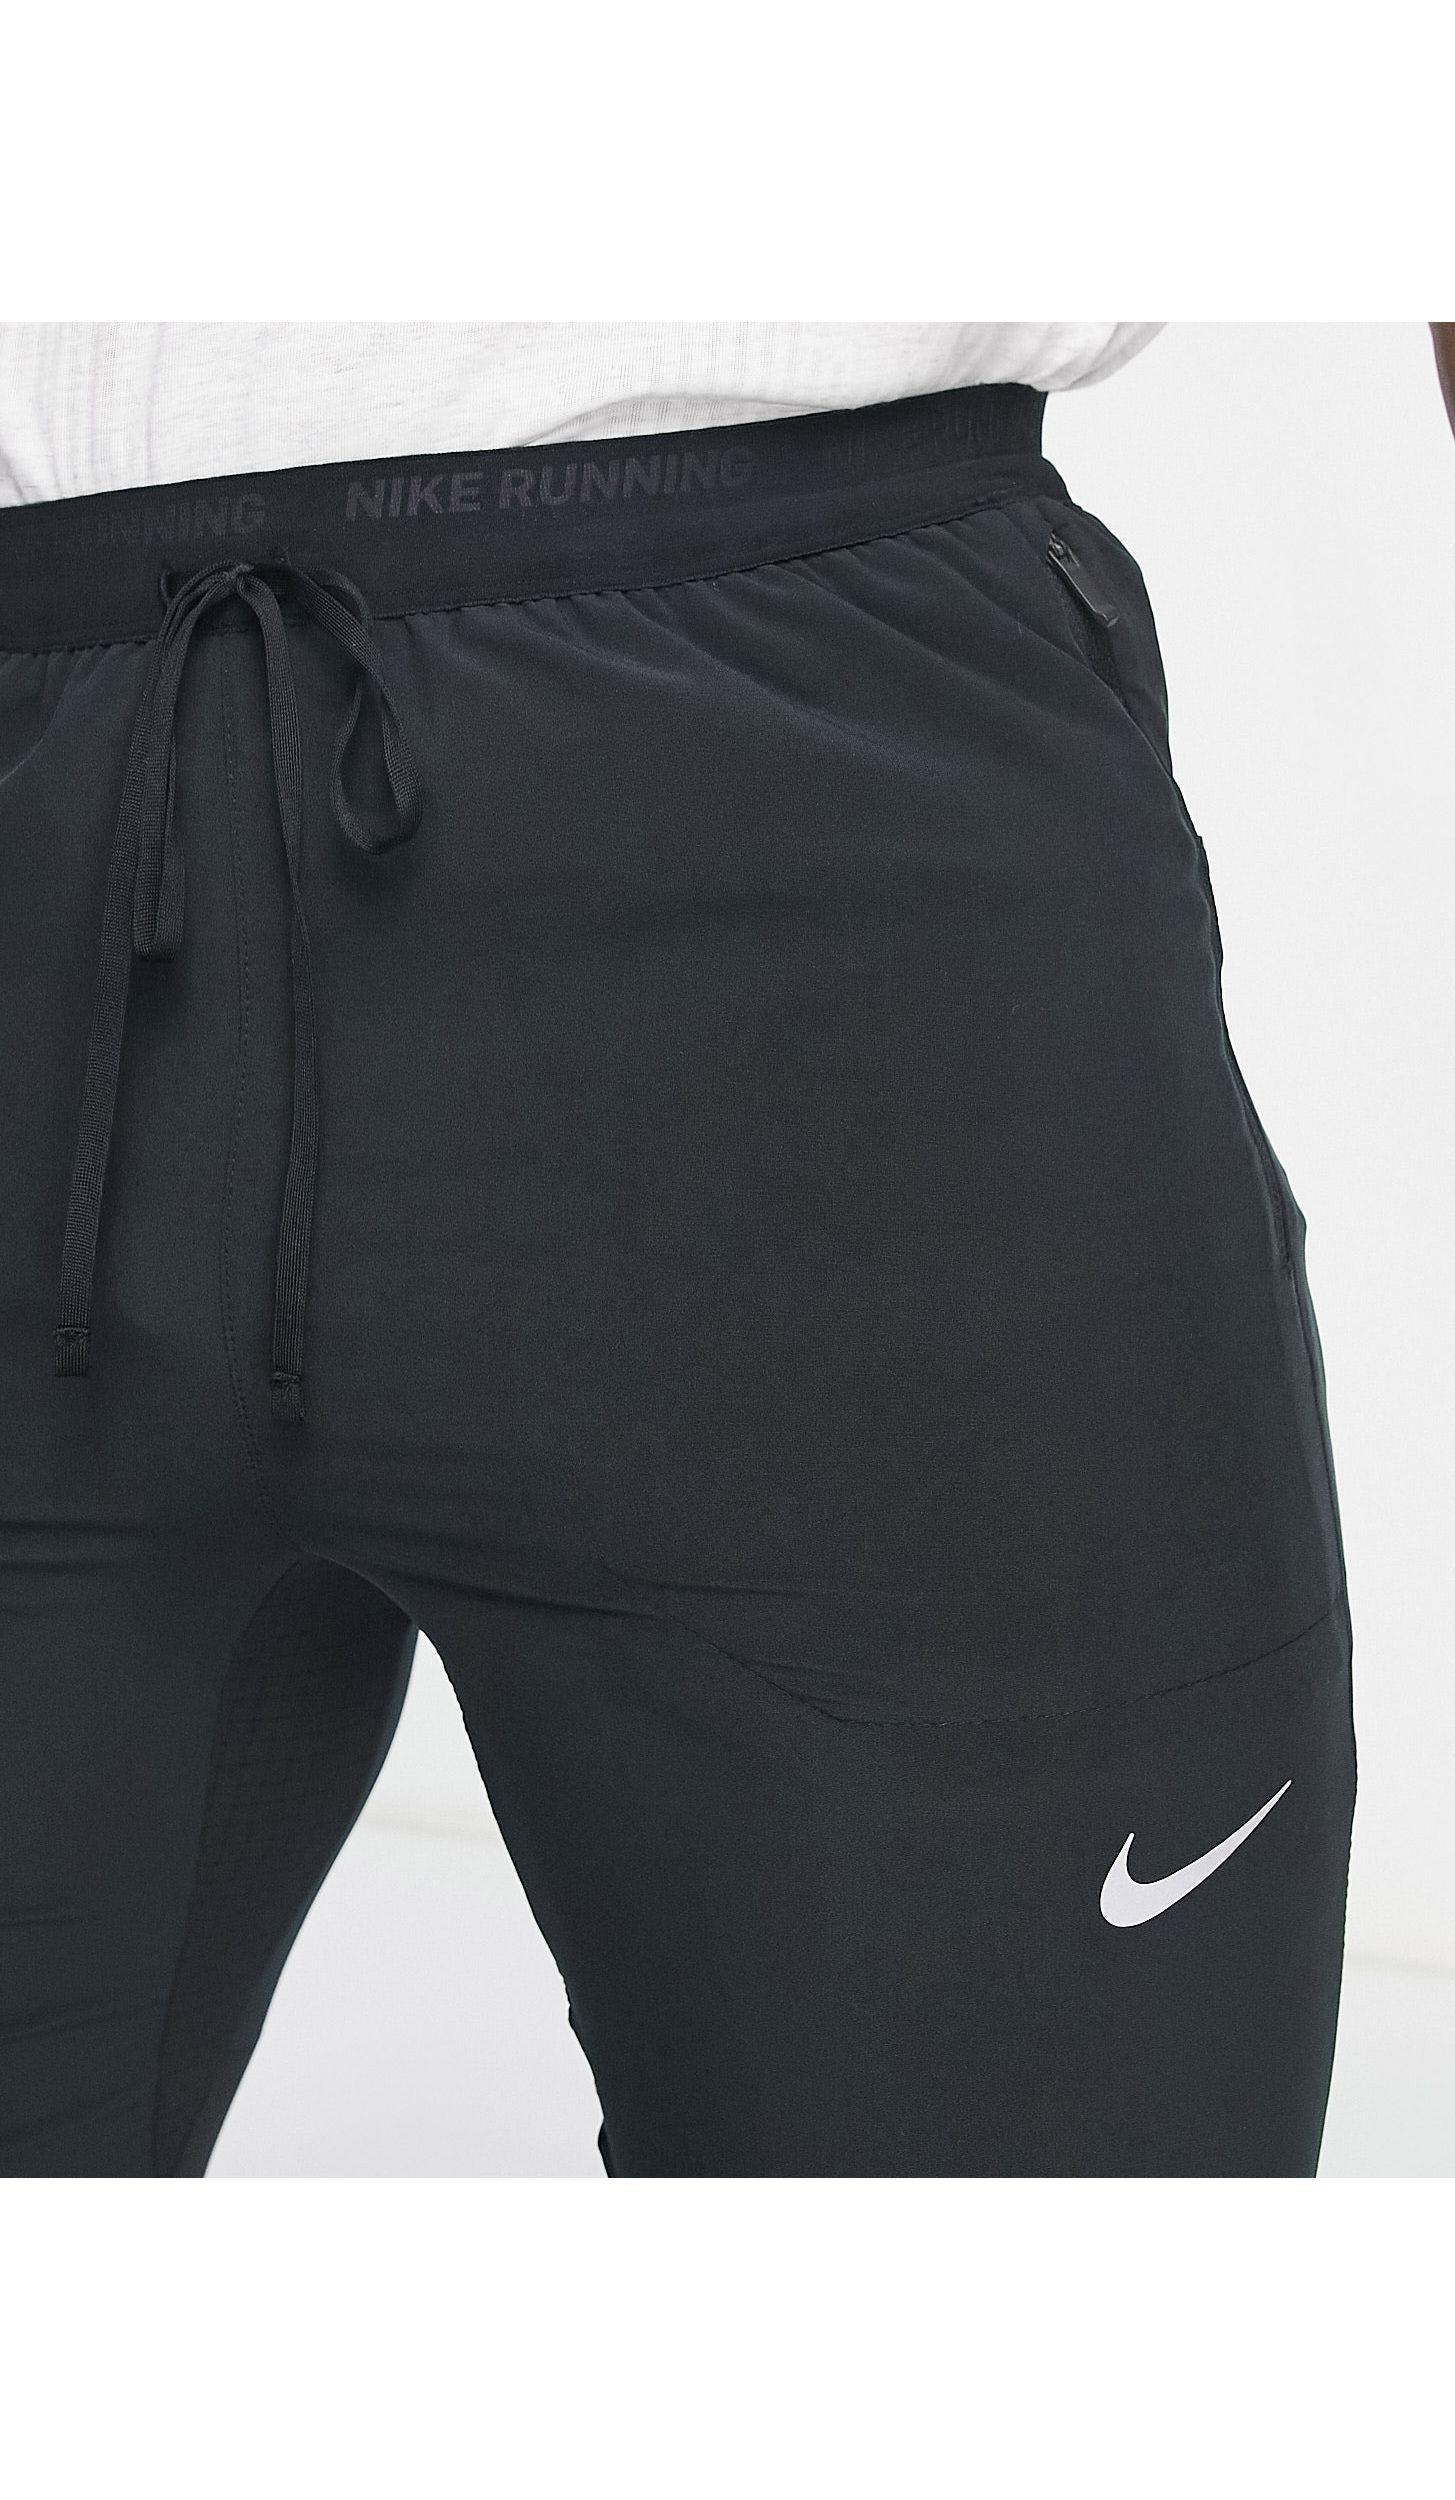 Nike Swift Women's 27 Running Pants. I really want to try these